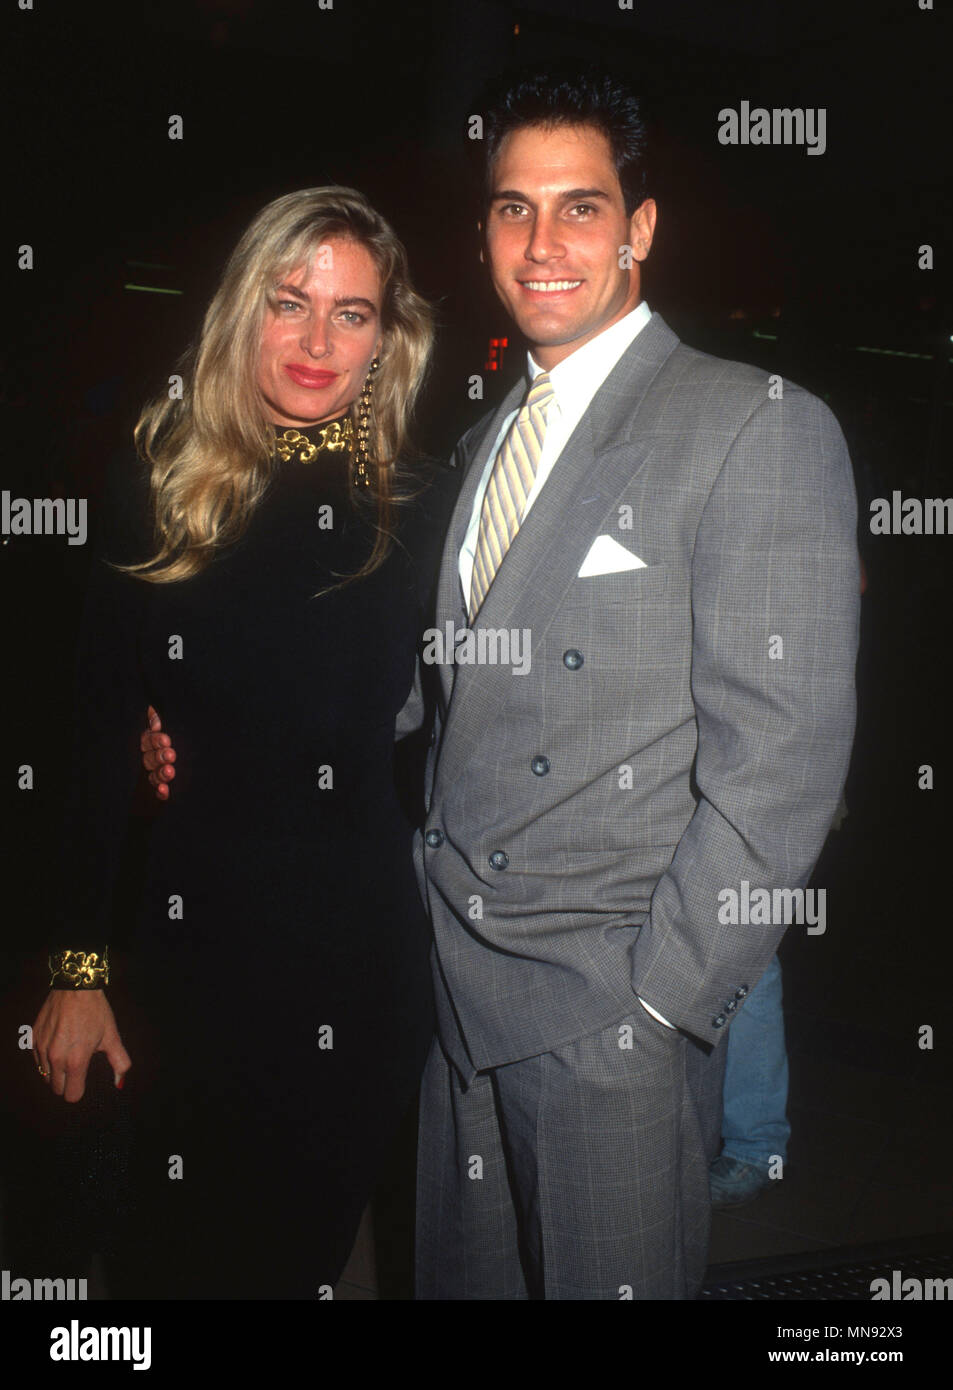 LOS ANGELES, CA - AUGUST 20: (L-R) Actress Eileen Davidson and actor Don Diamont attend screening of 'Eternity' on August 20, 1990 in Los Angeles, California. Photo by Barry King/Alamy Stock Photo Stock Photo